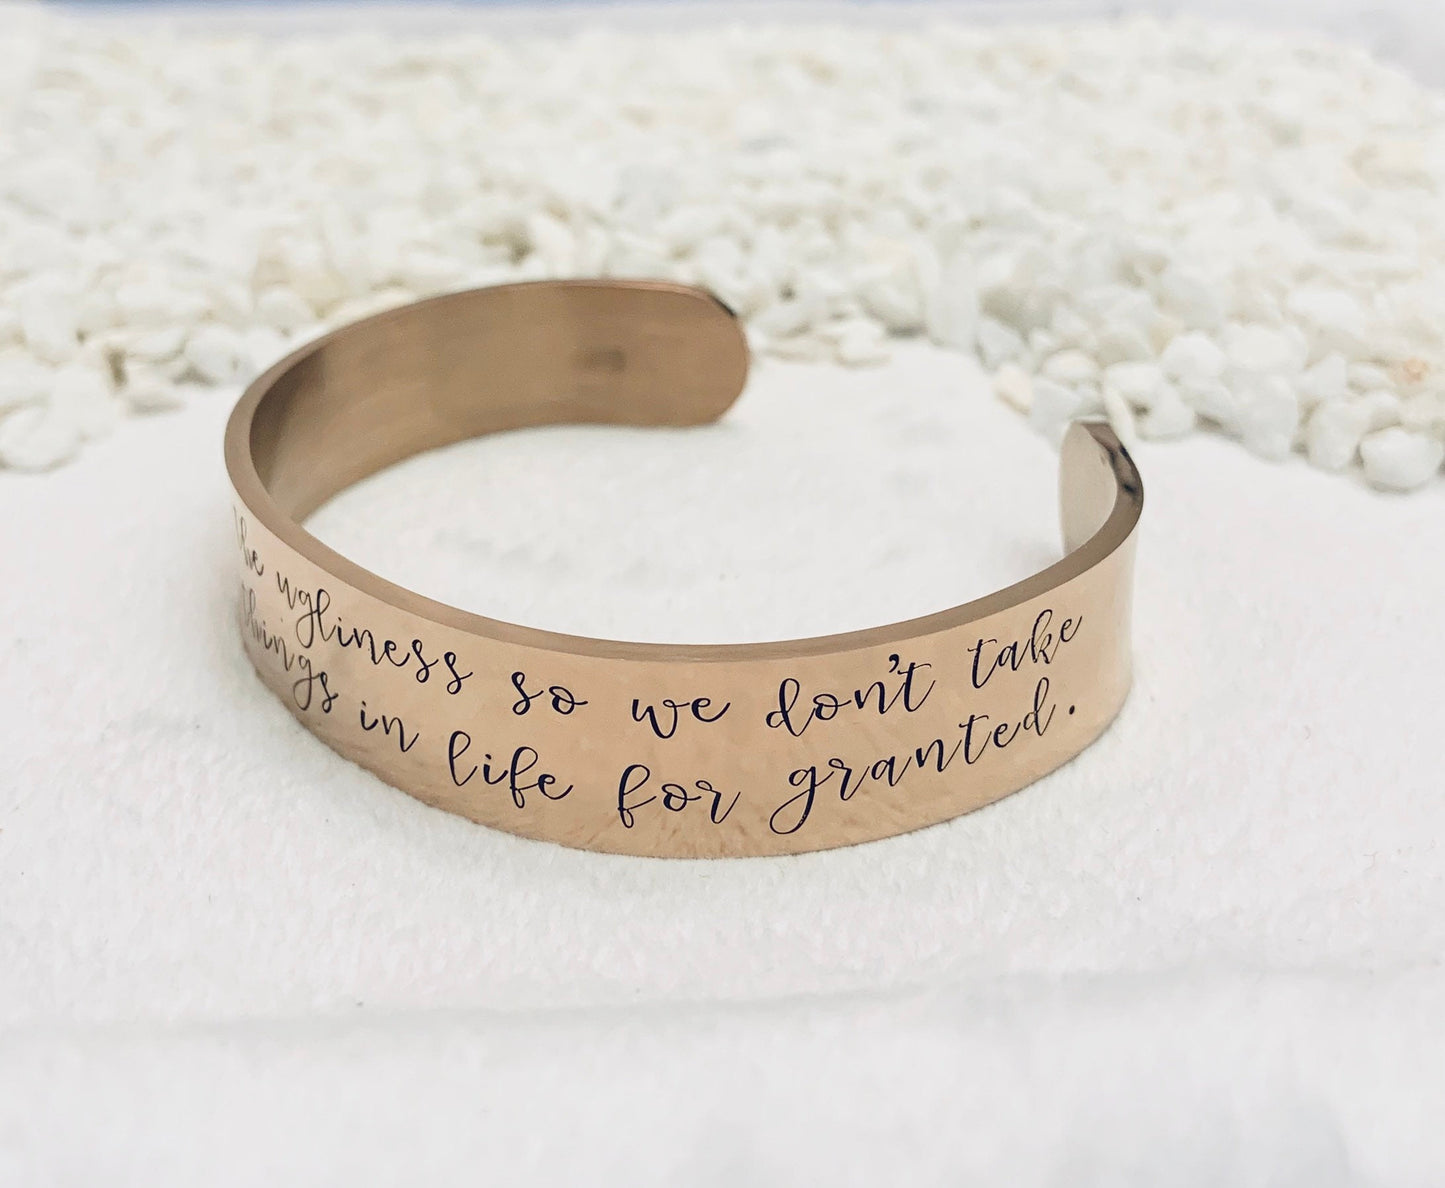 God gives us the ugliness so we don't take the beautiful things in life for granted (Colleen Hoover) - Cuff Bracelet